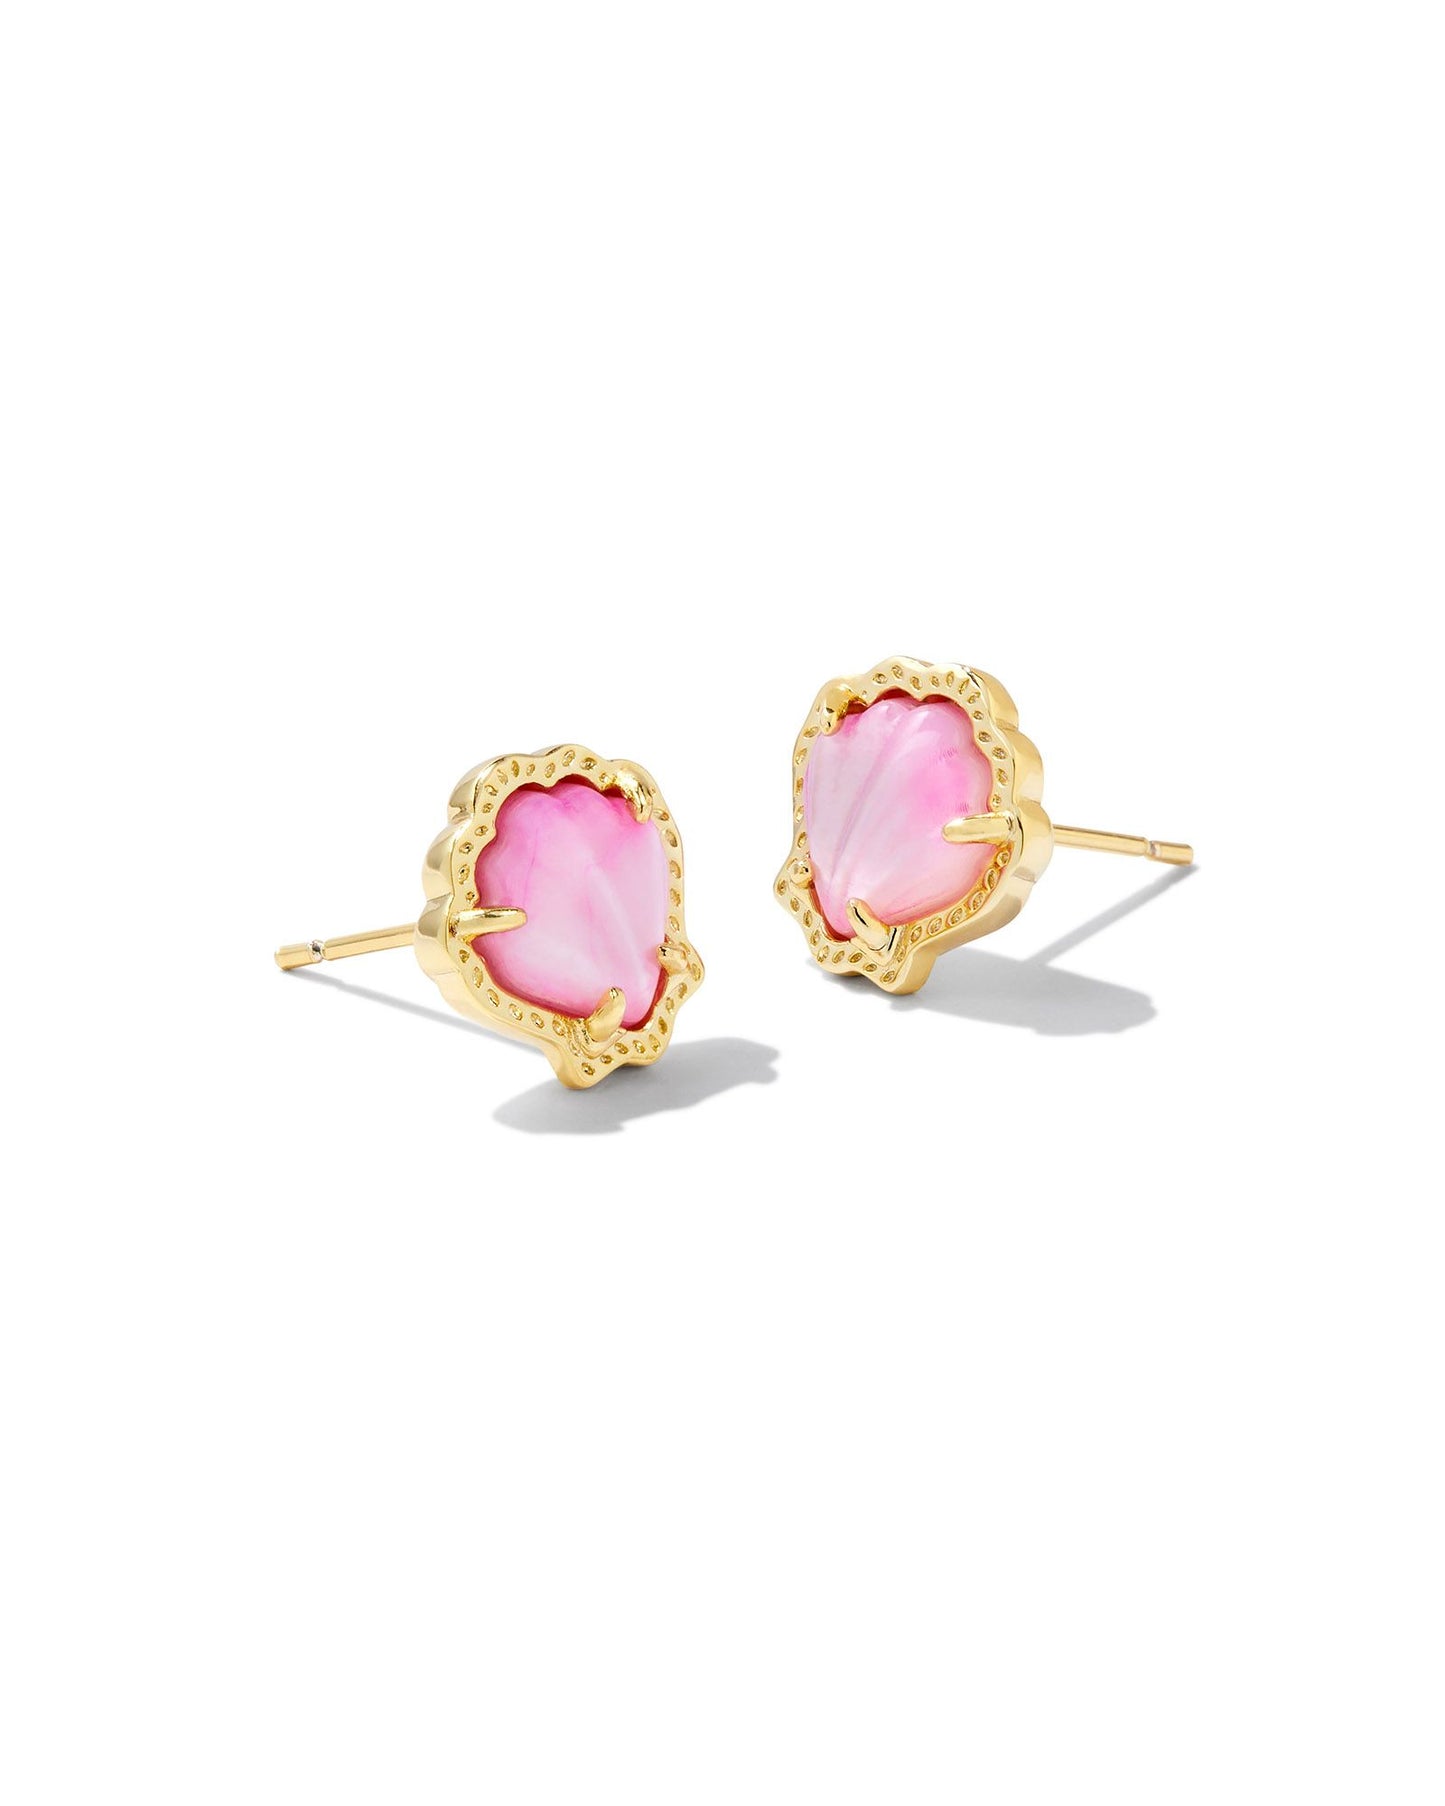 Brynne Gold Shell Stud Earrings in Blush Ivory Mother of Pearl